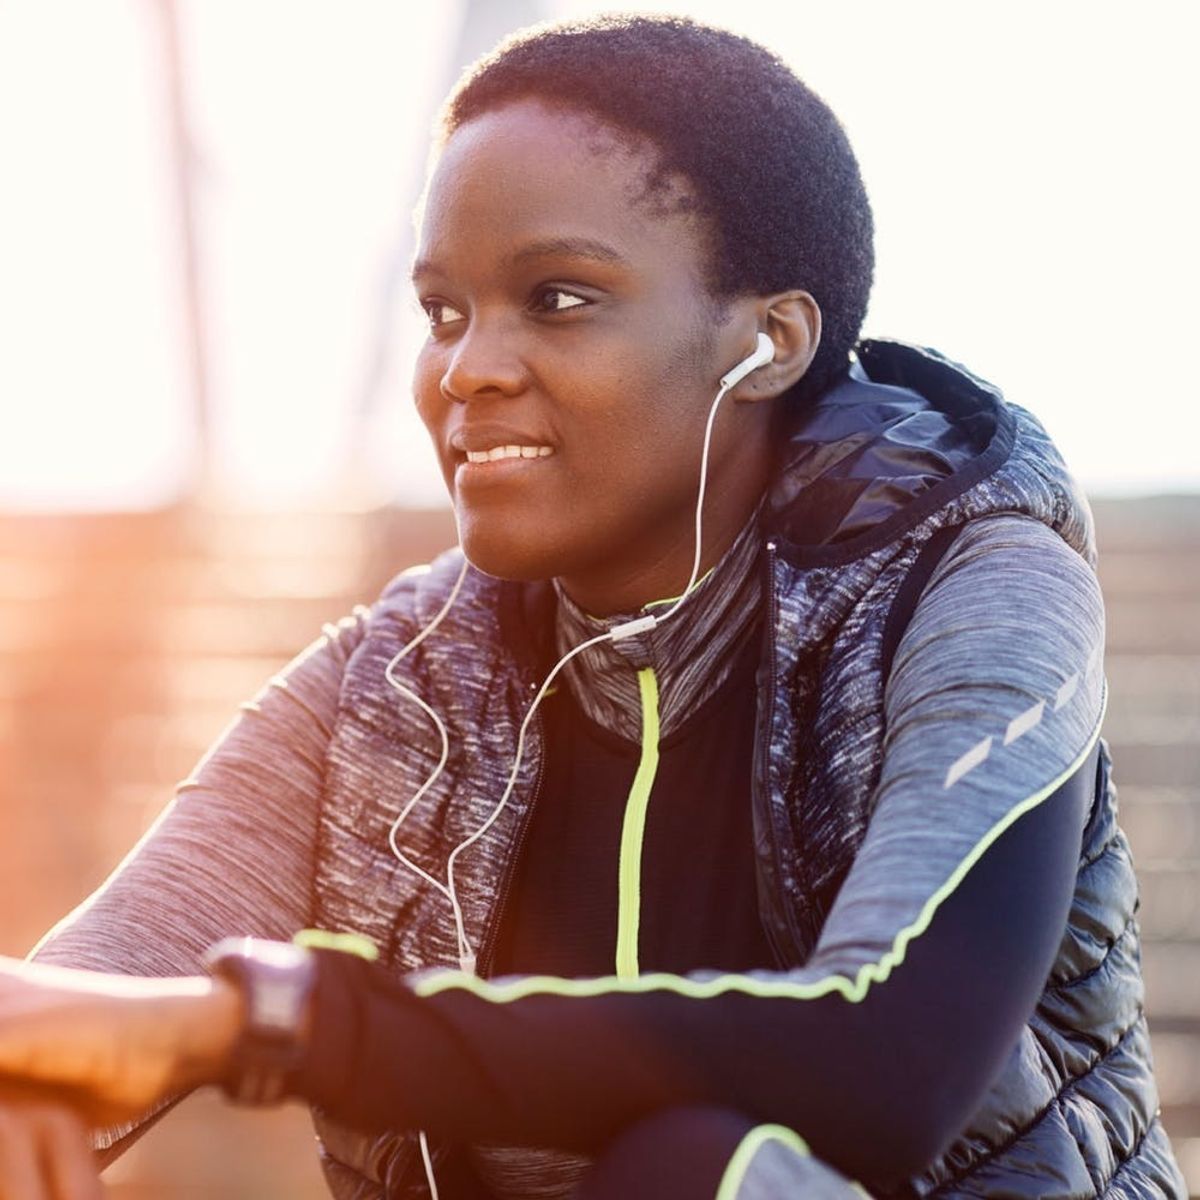 7 Expert Music Tips to Boost Your Workout